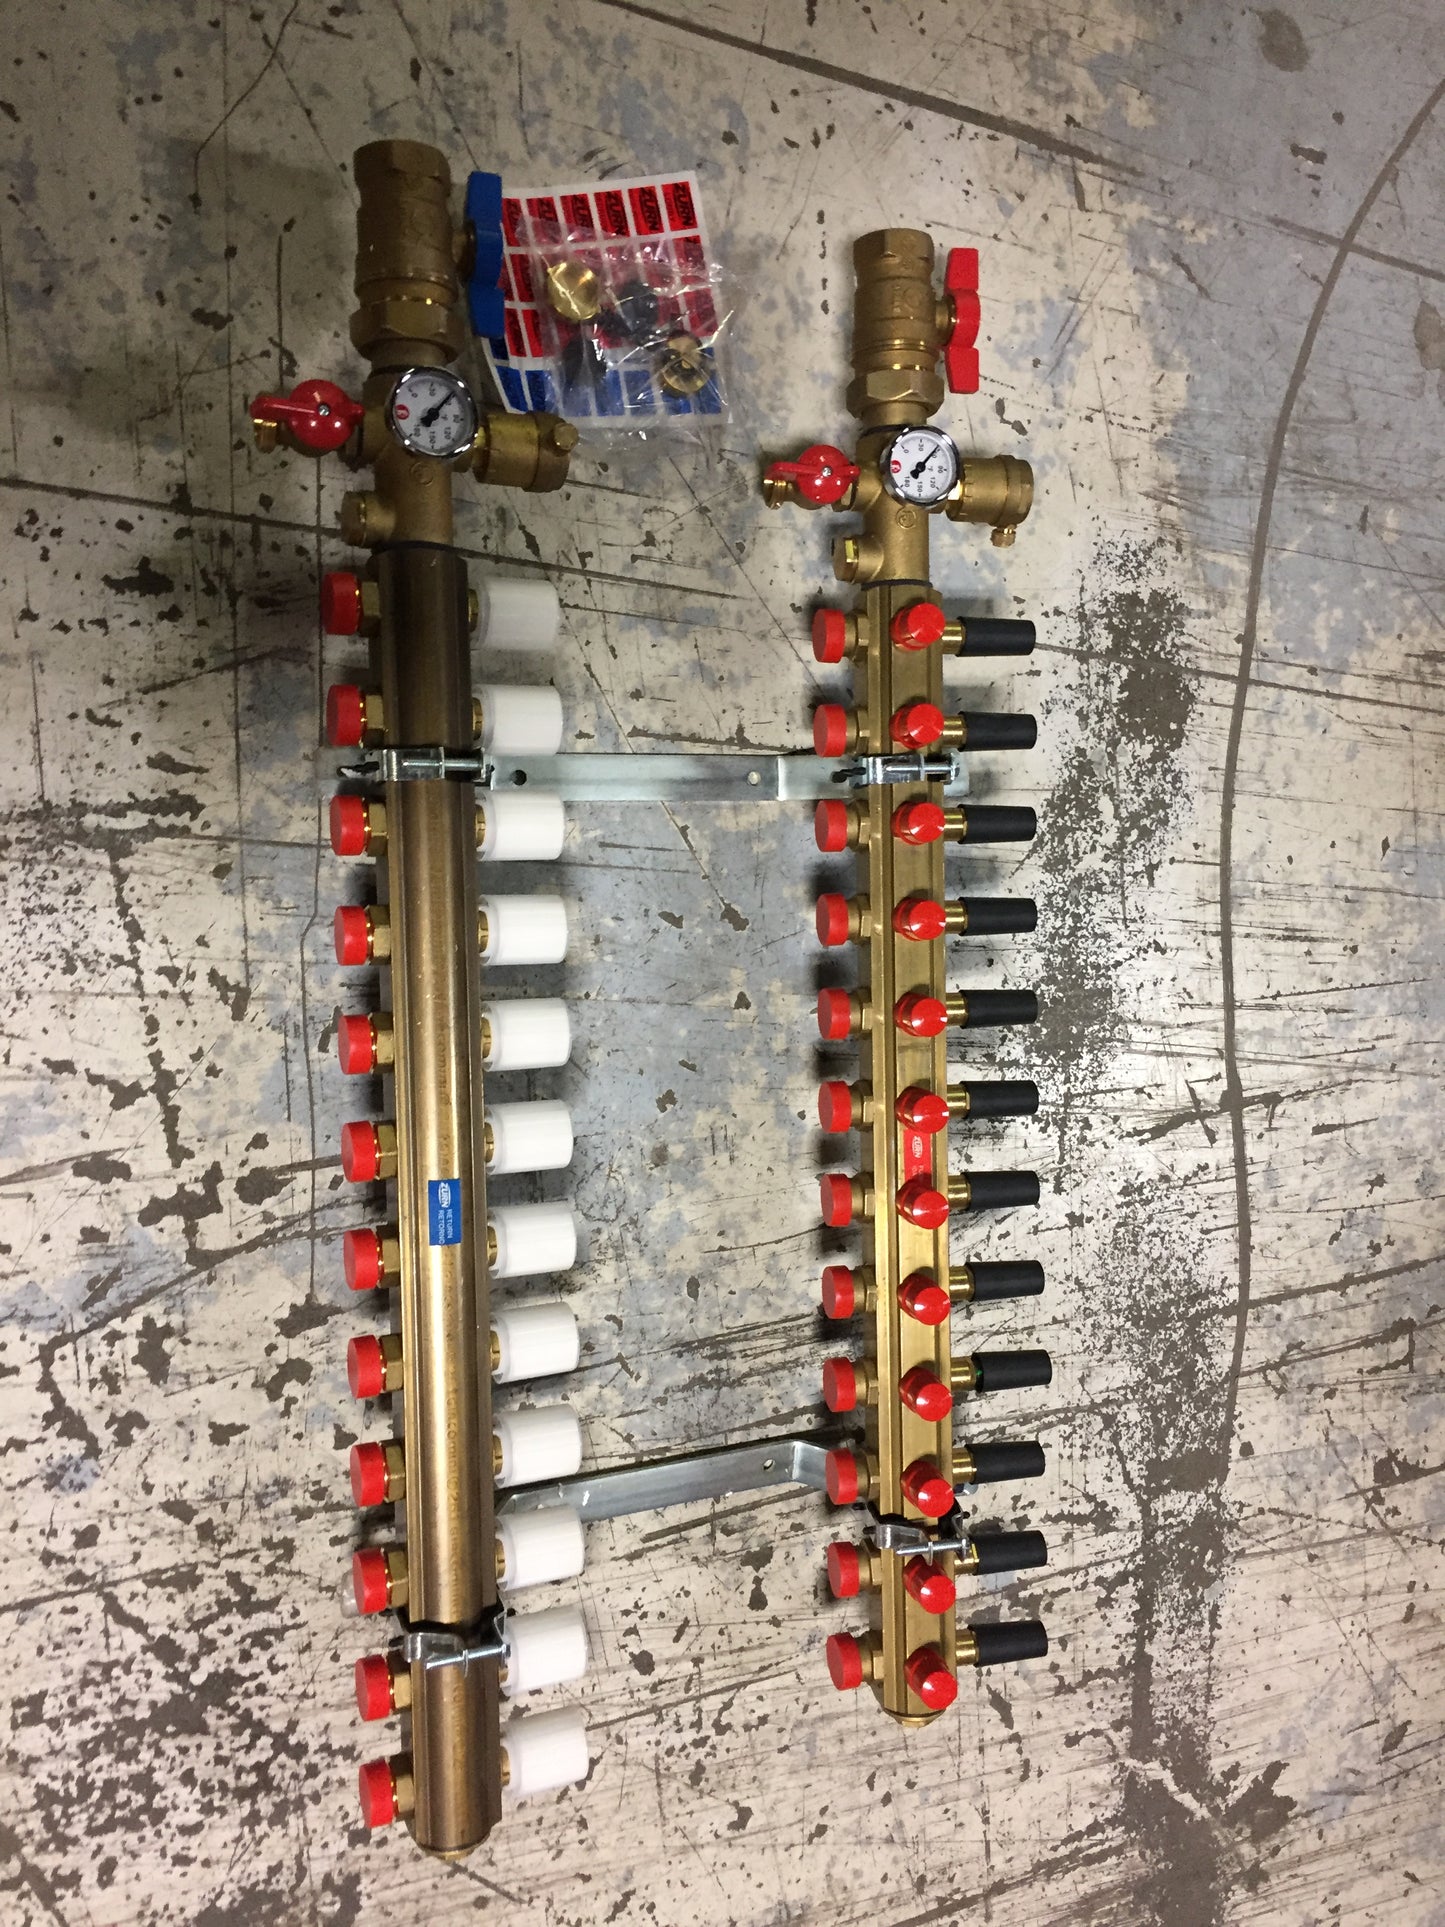 12 PORT "ACCUFLOW" PREASSEMBLED RADIANT HEATING MANIFOLD